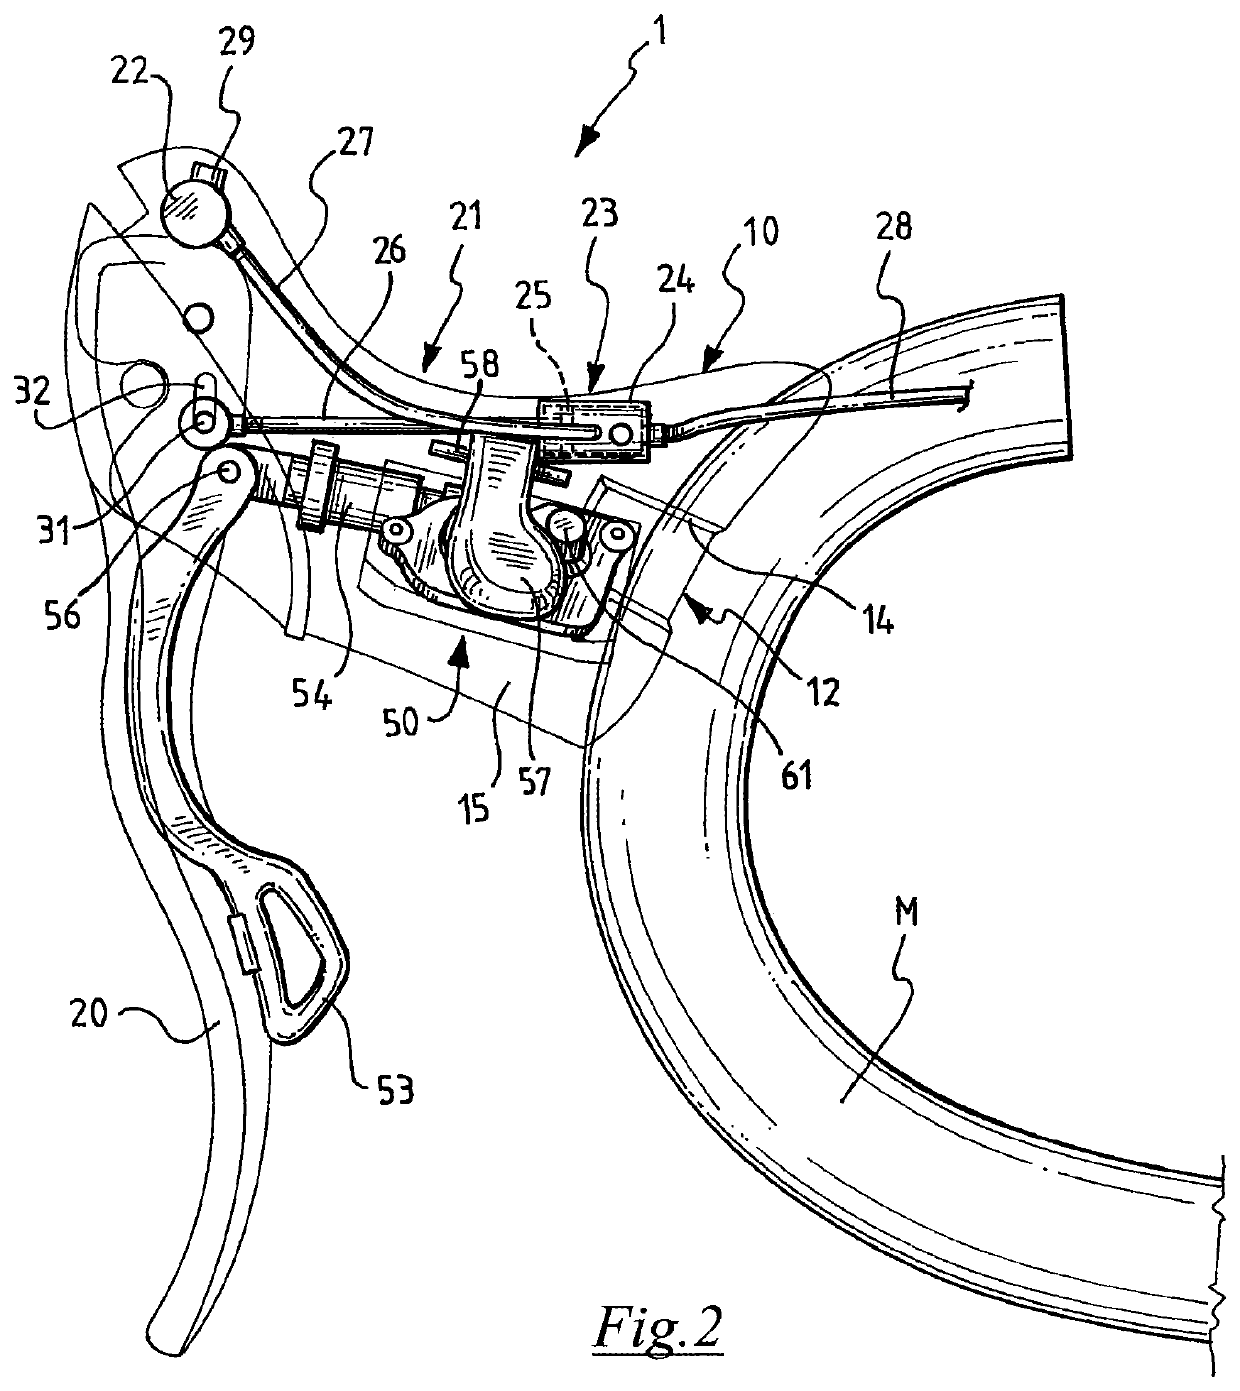 Integrated drive for bicycle handlebars